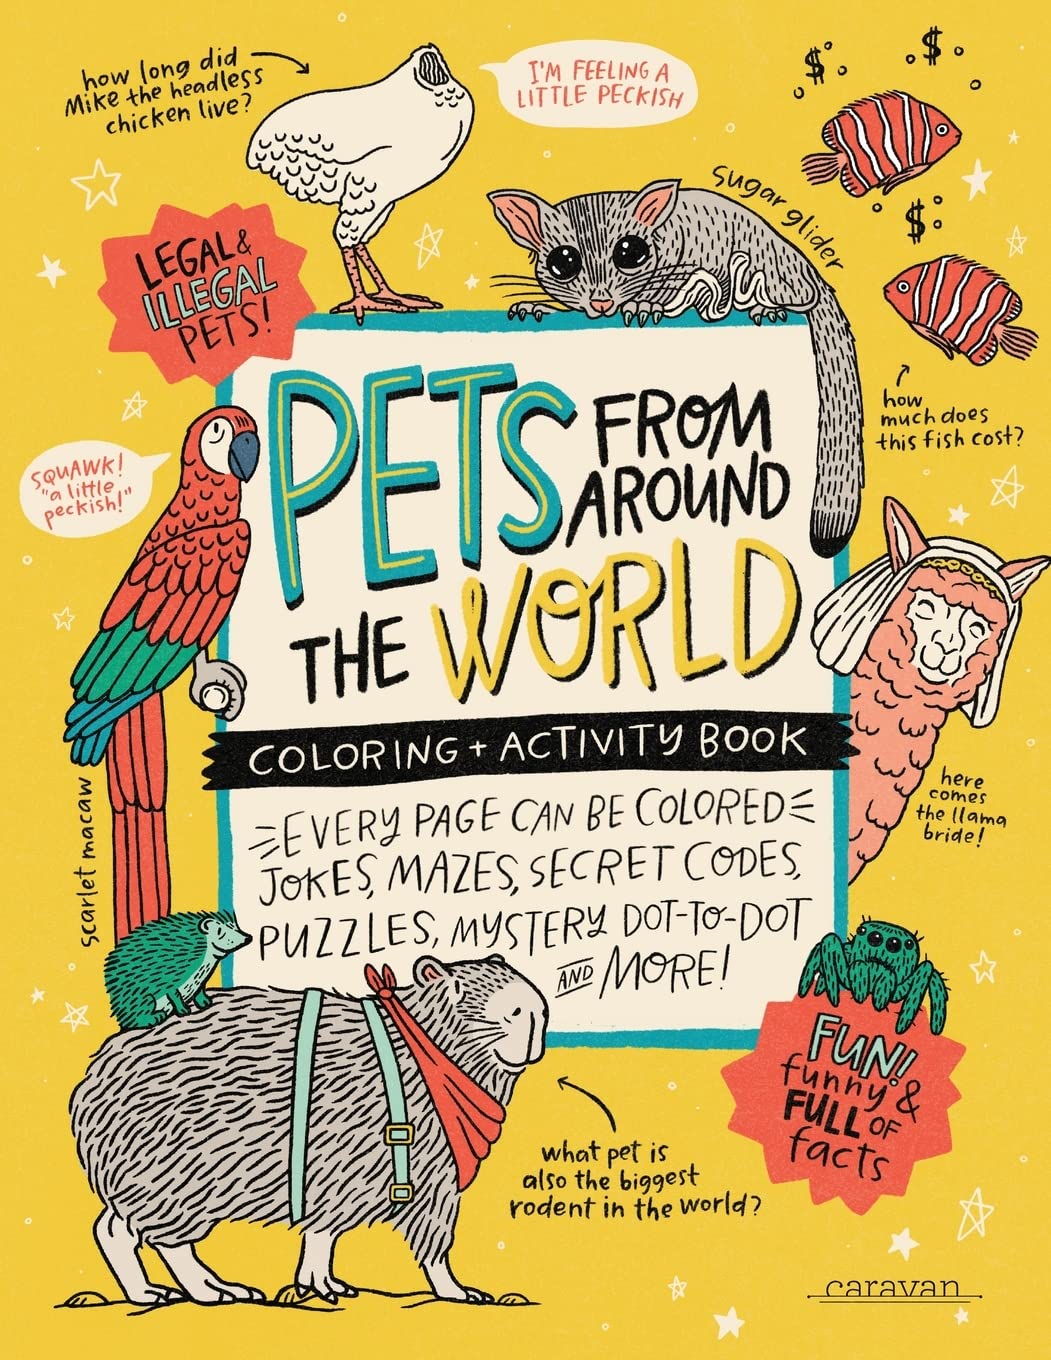 PETS from around the WORLD Coloring + Activity Book: Jokes, Mazes, Secret Codes, Puzzles, Mystery Dot-to-Dot & MORE! (Caravan Coloring + Activity Books)